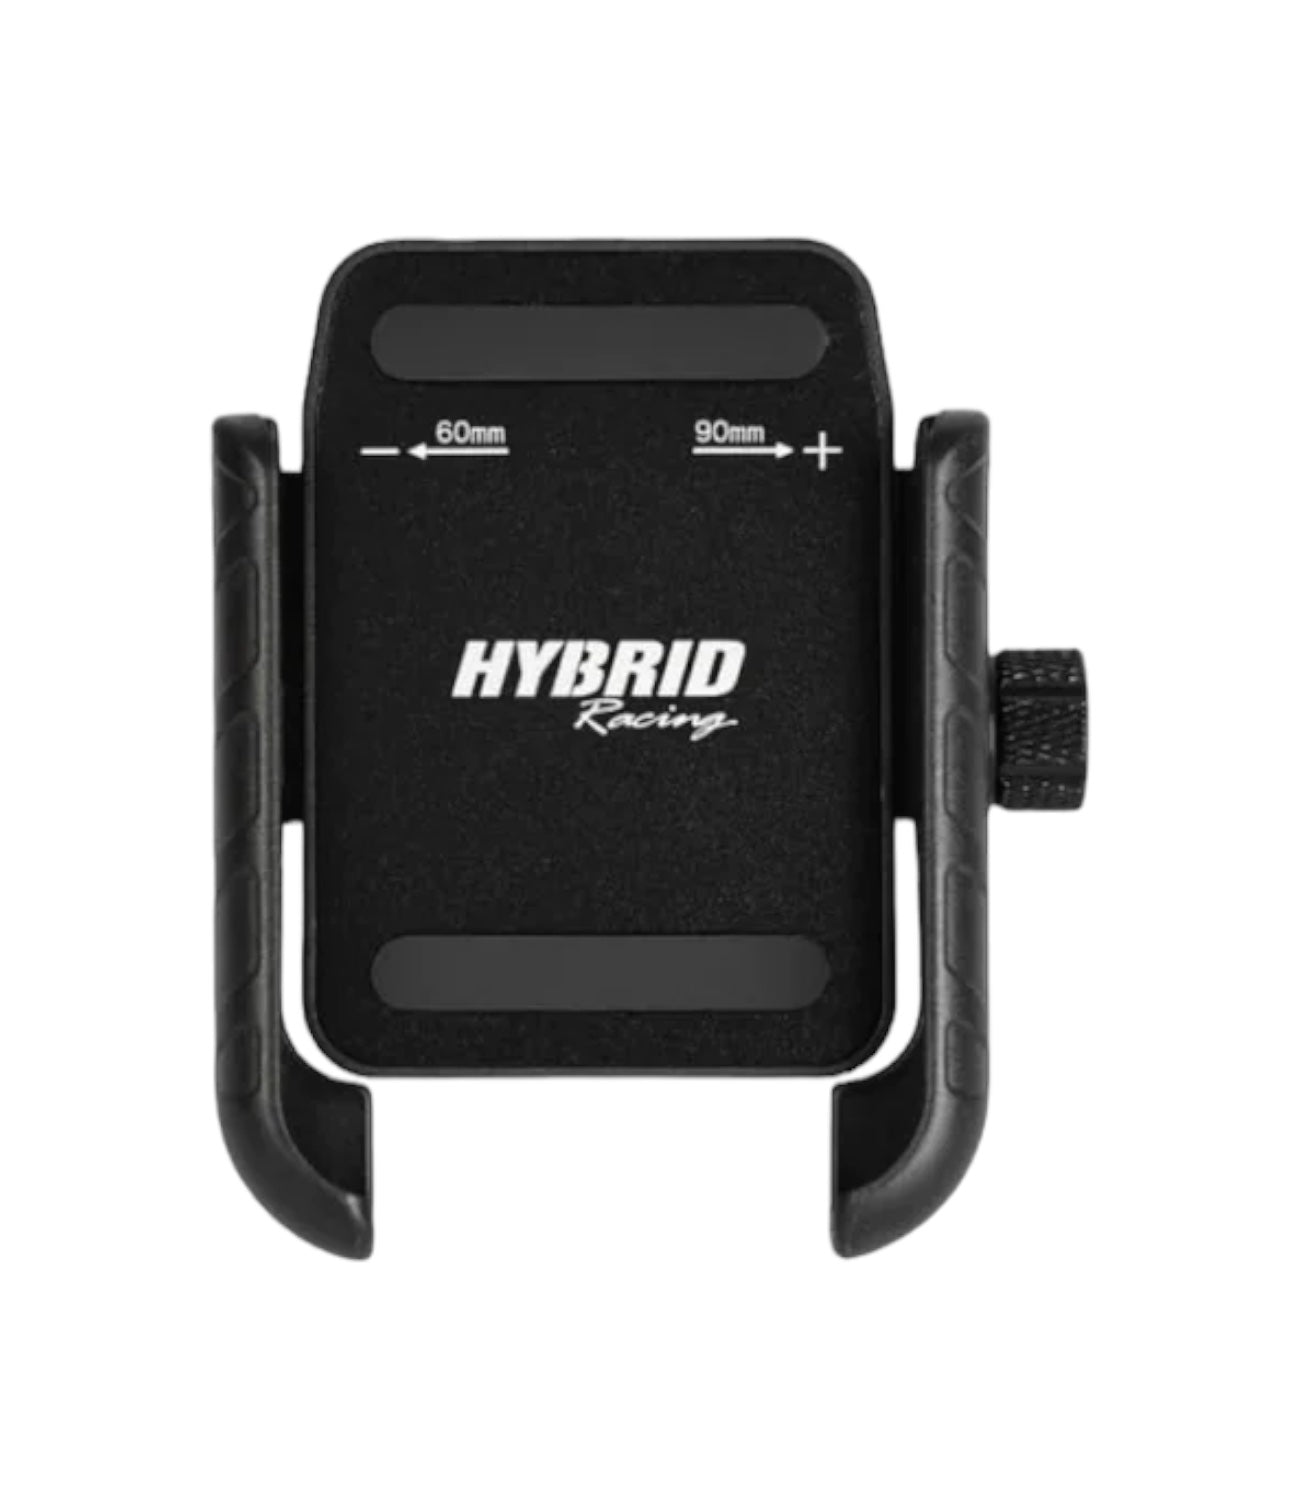 HYBRID Racing Bike Mobile Holder Without Charging